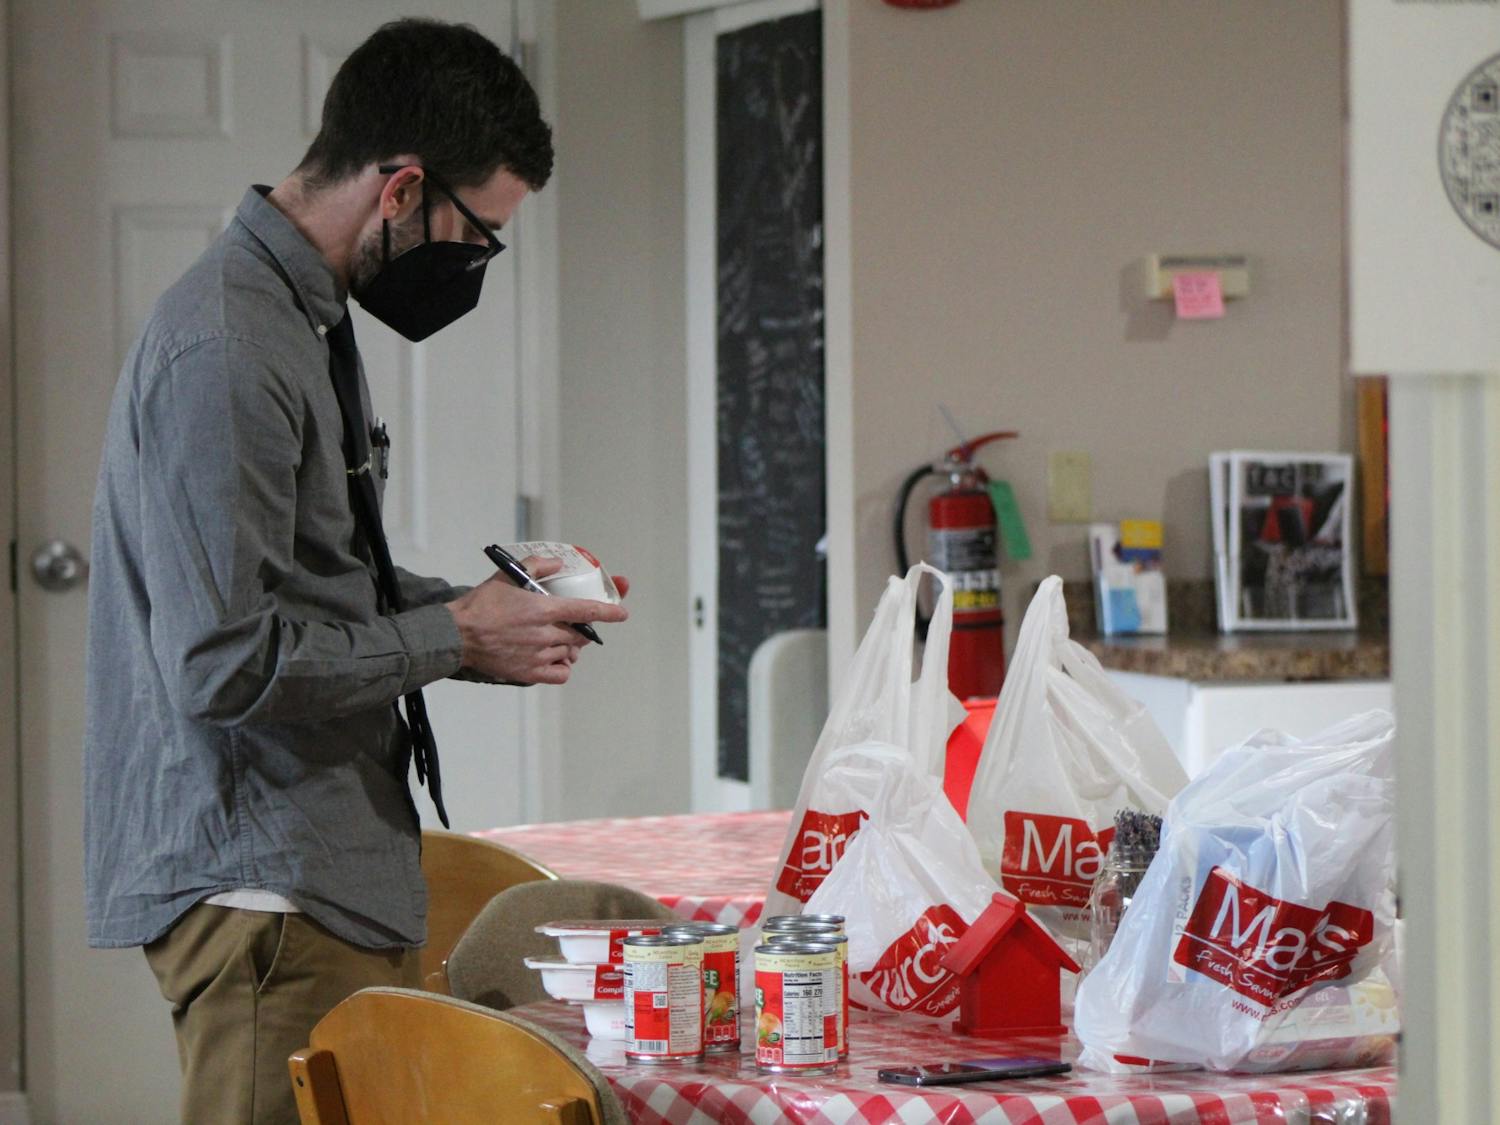 Wesley Engel, Resource Manager at the Promise House, takes stock of the inventory and checks expiration dates.